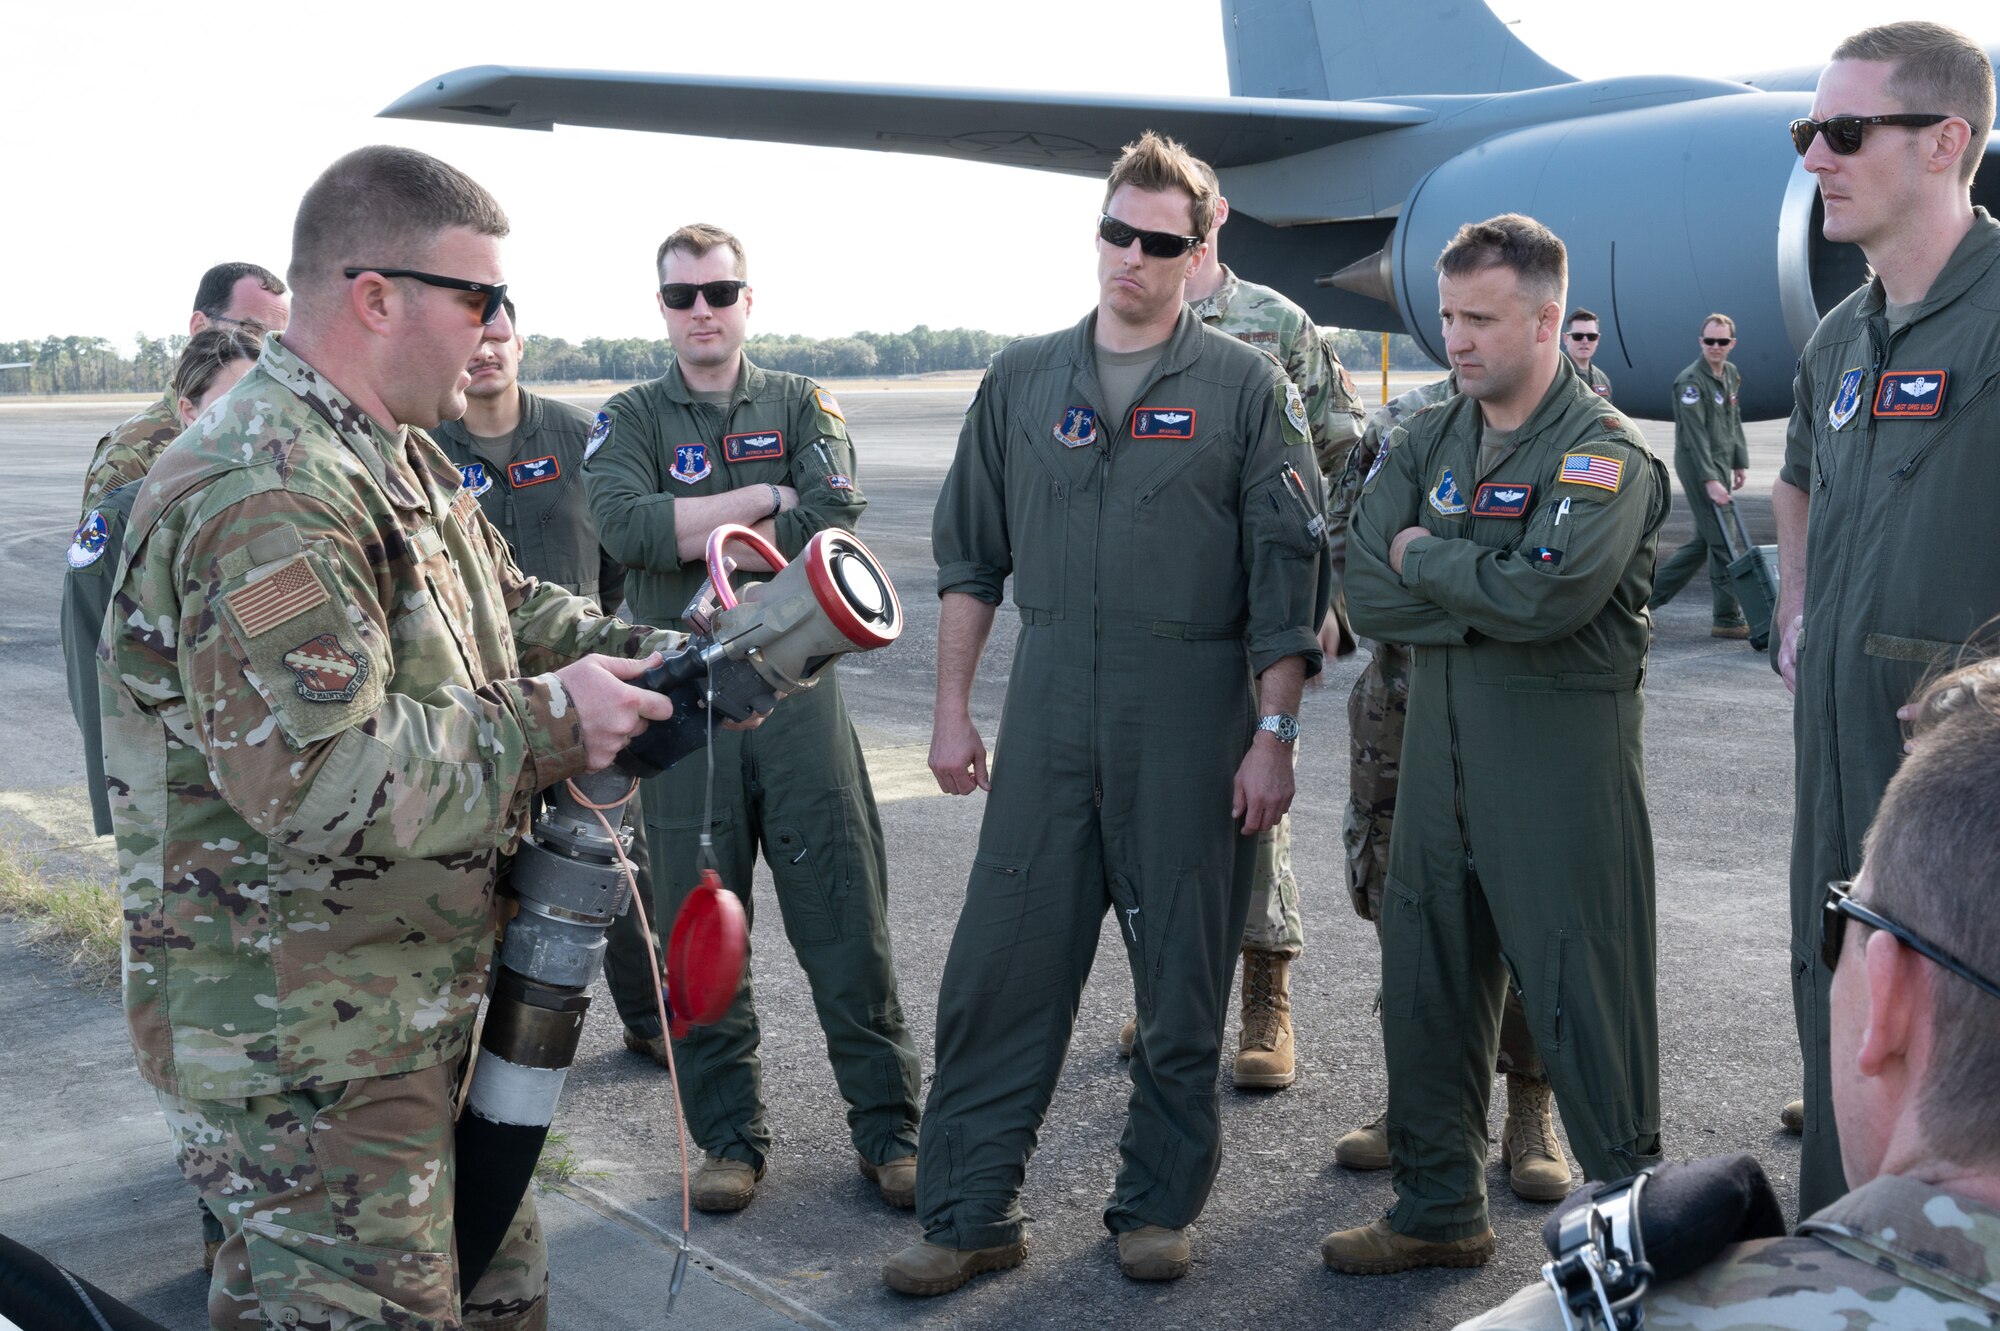 A group of Air Force pilots stand watching as a maintenance personnel holds up a aircraft fuel hose and explains how to use it.